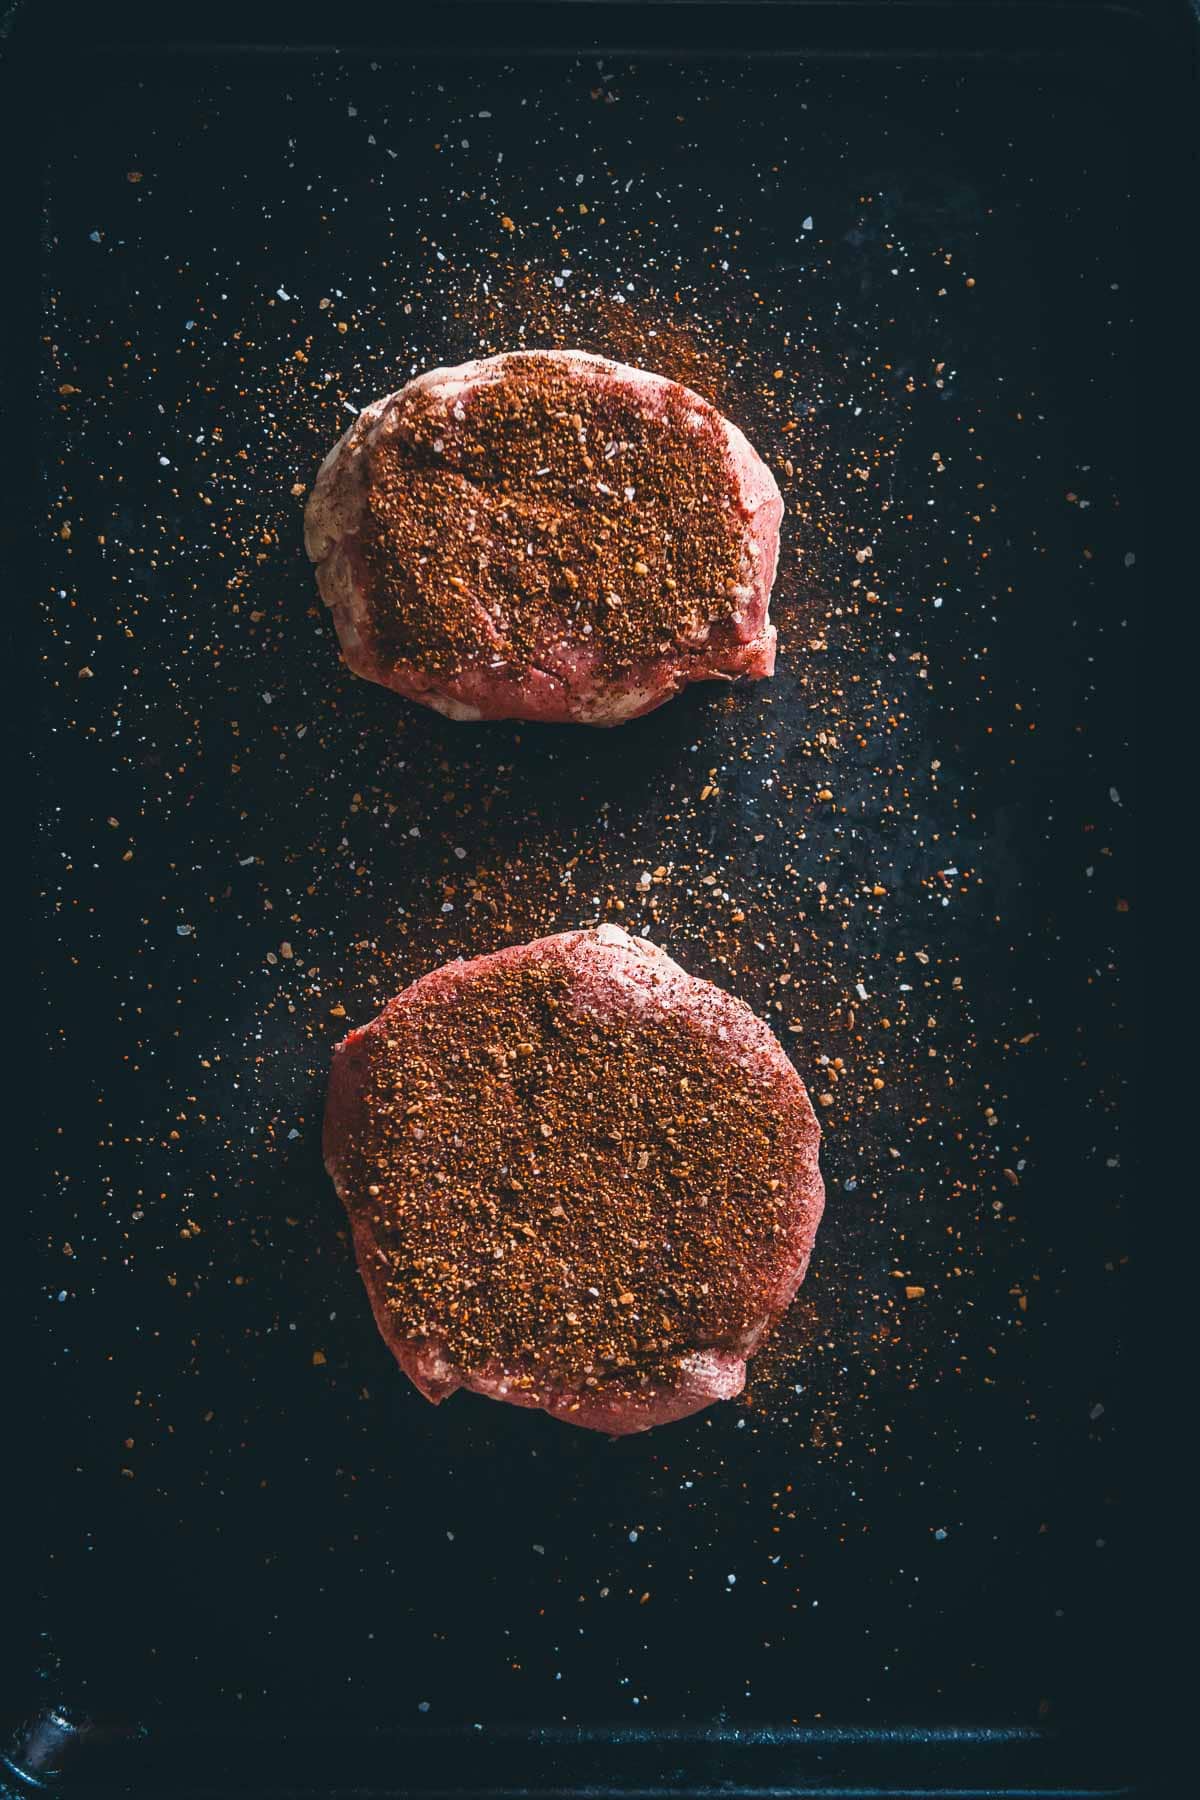 Chuck steaks coated in spices.